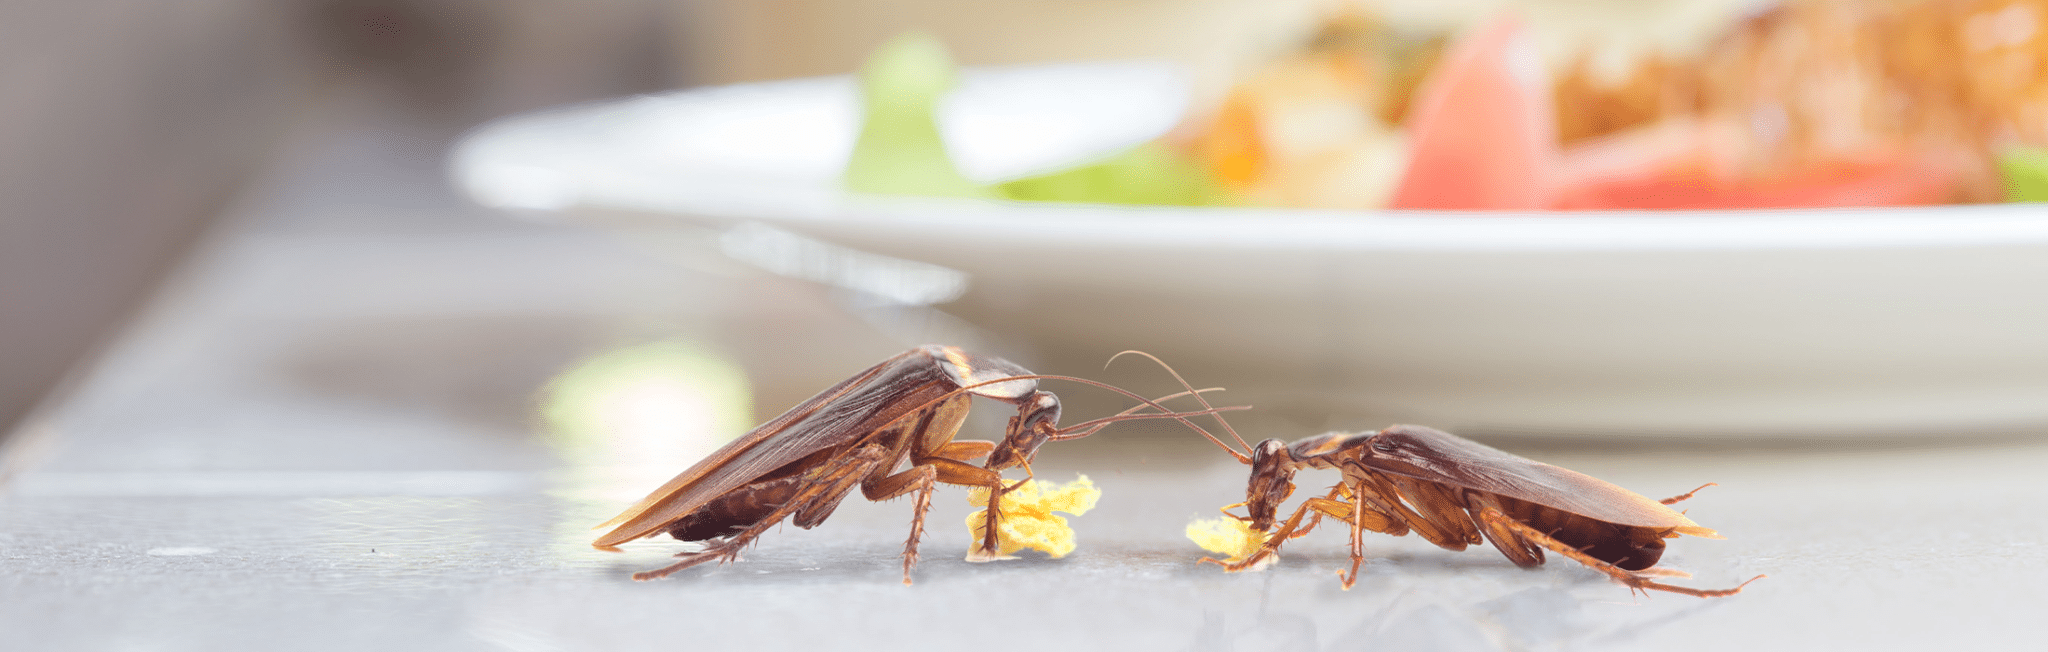 Watch out for flying cockroaches this summer - Flick Pest Control